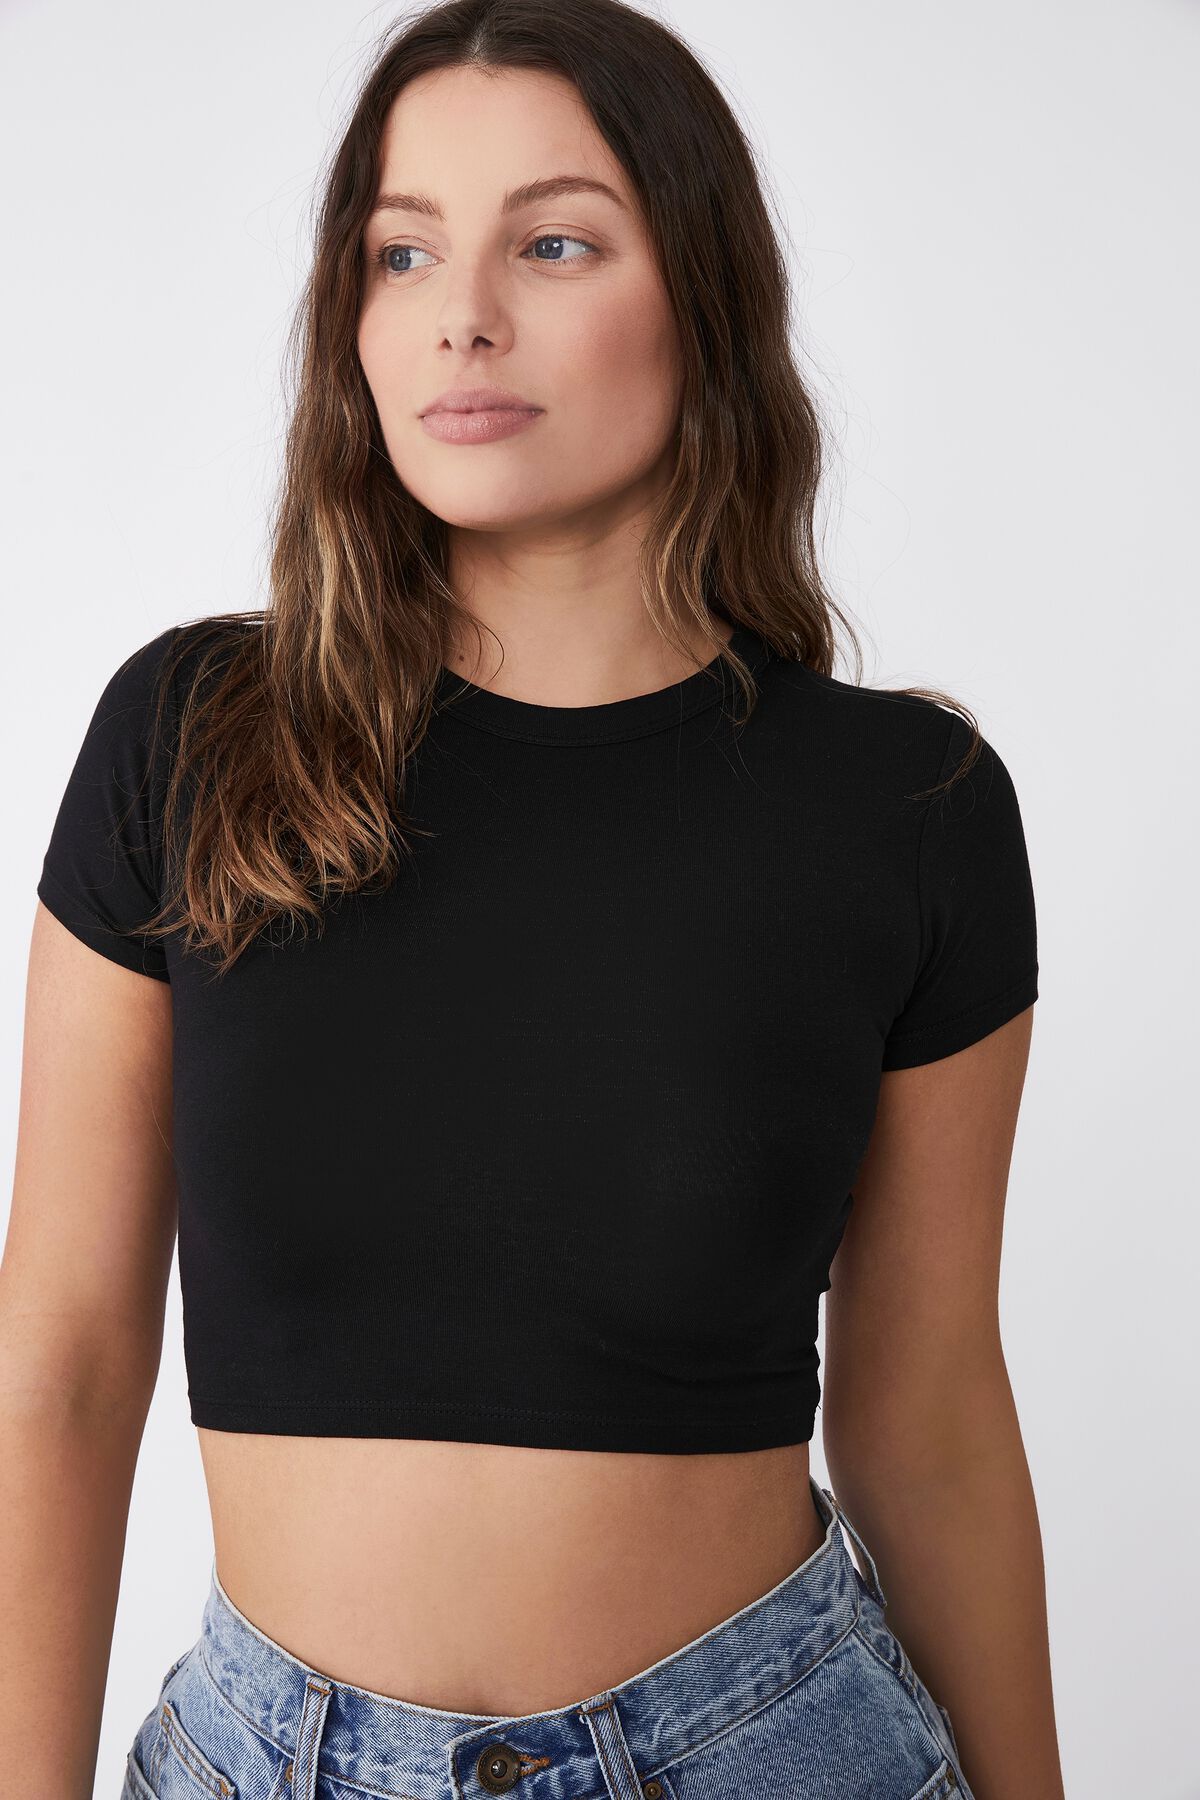 Micro Crop Tee | Cotton On (ANZ)